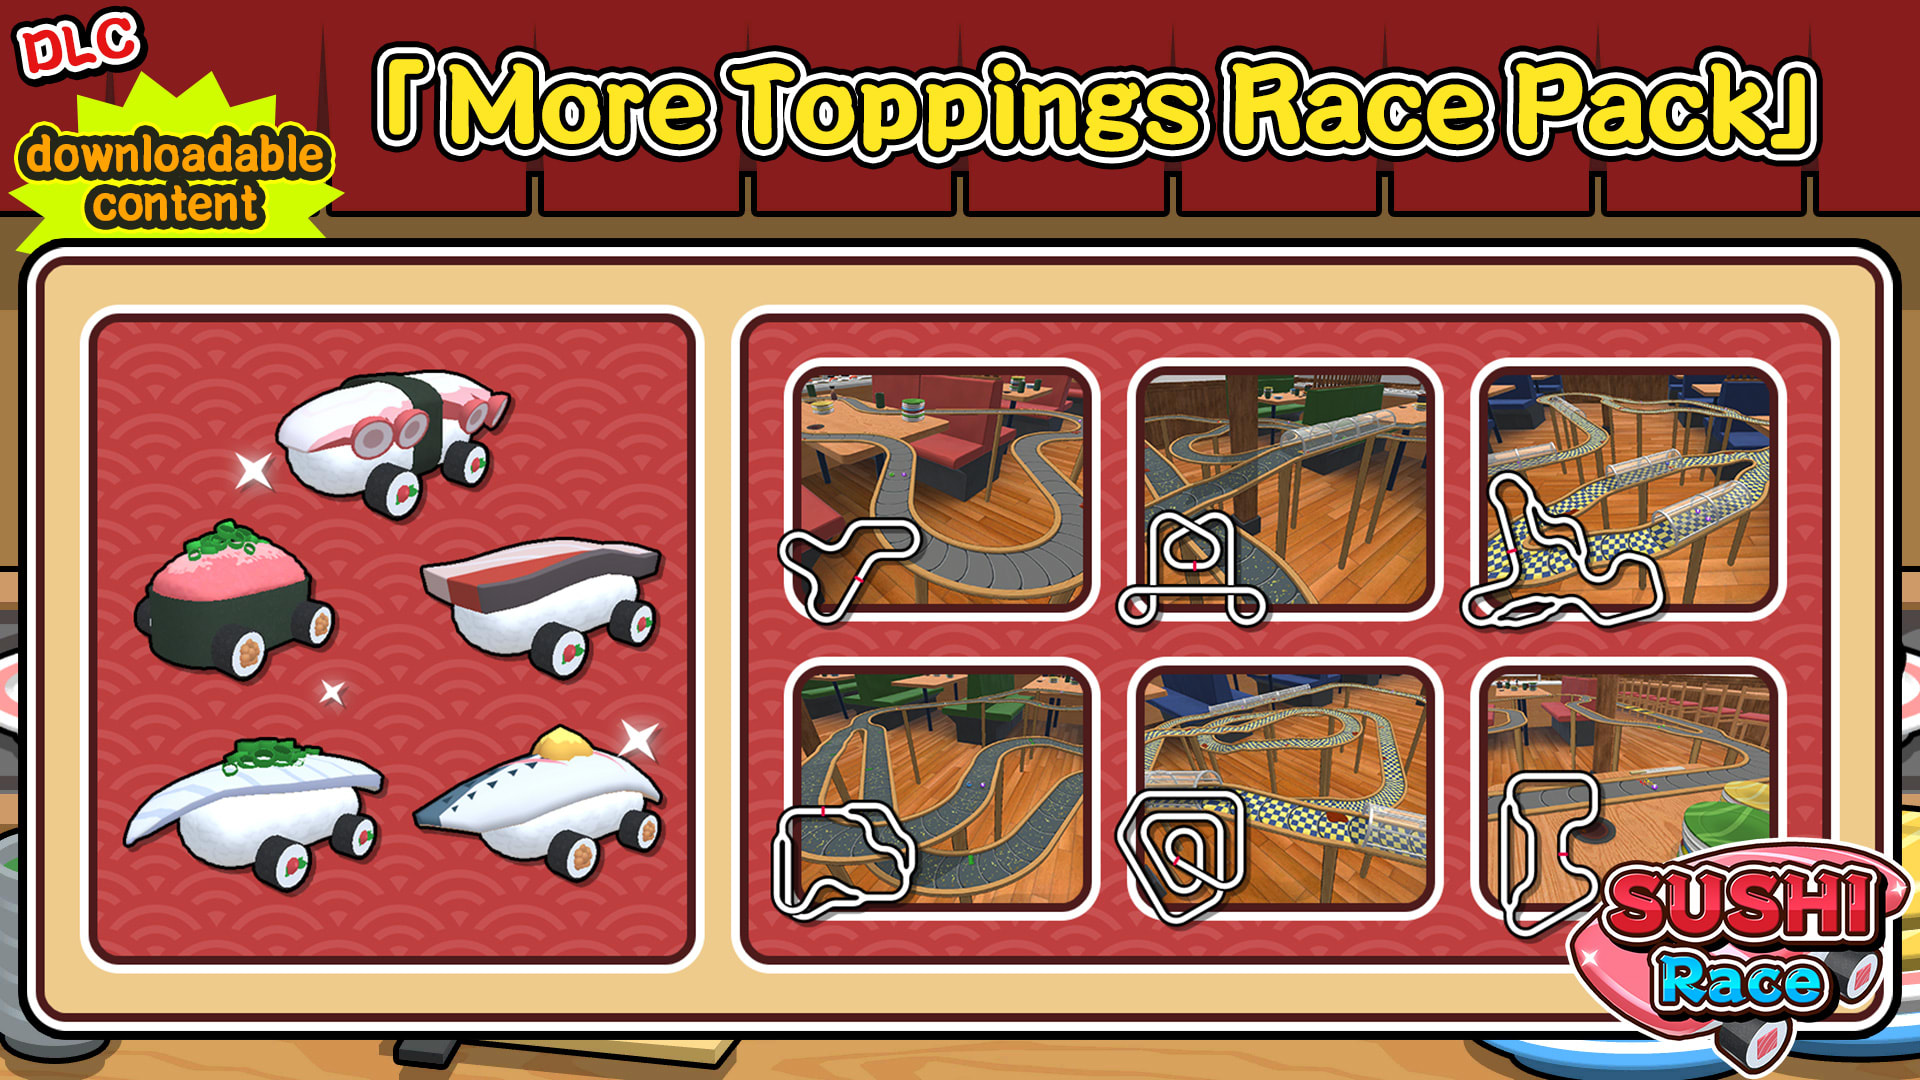 More Toppings Race Pack